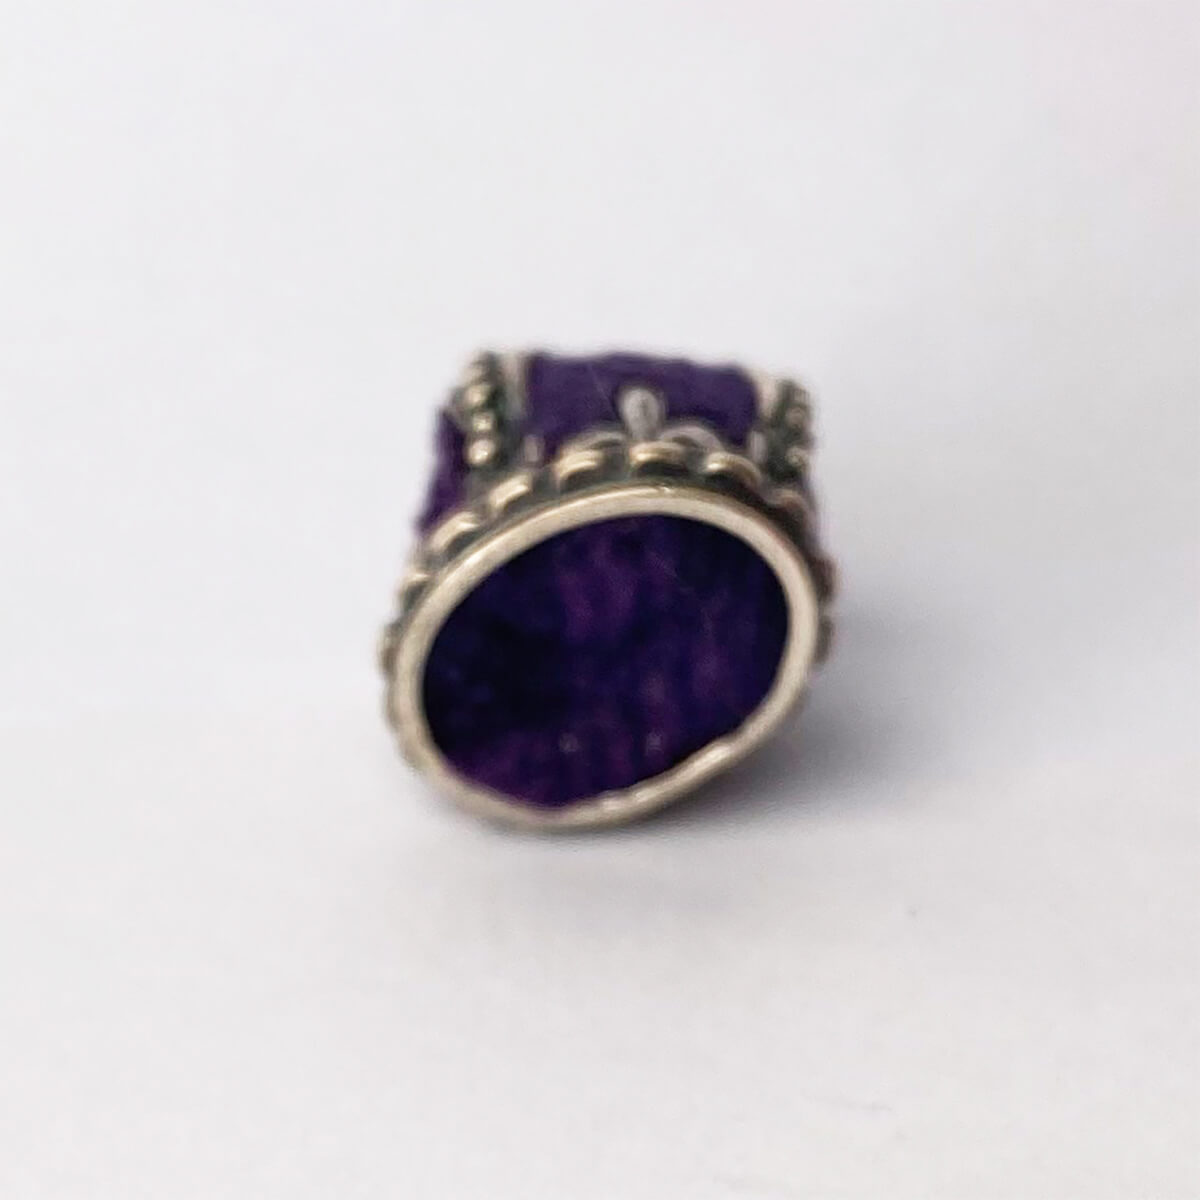 Vintage Beaucraft crown charm with purple fabric